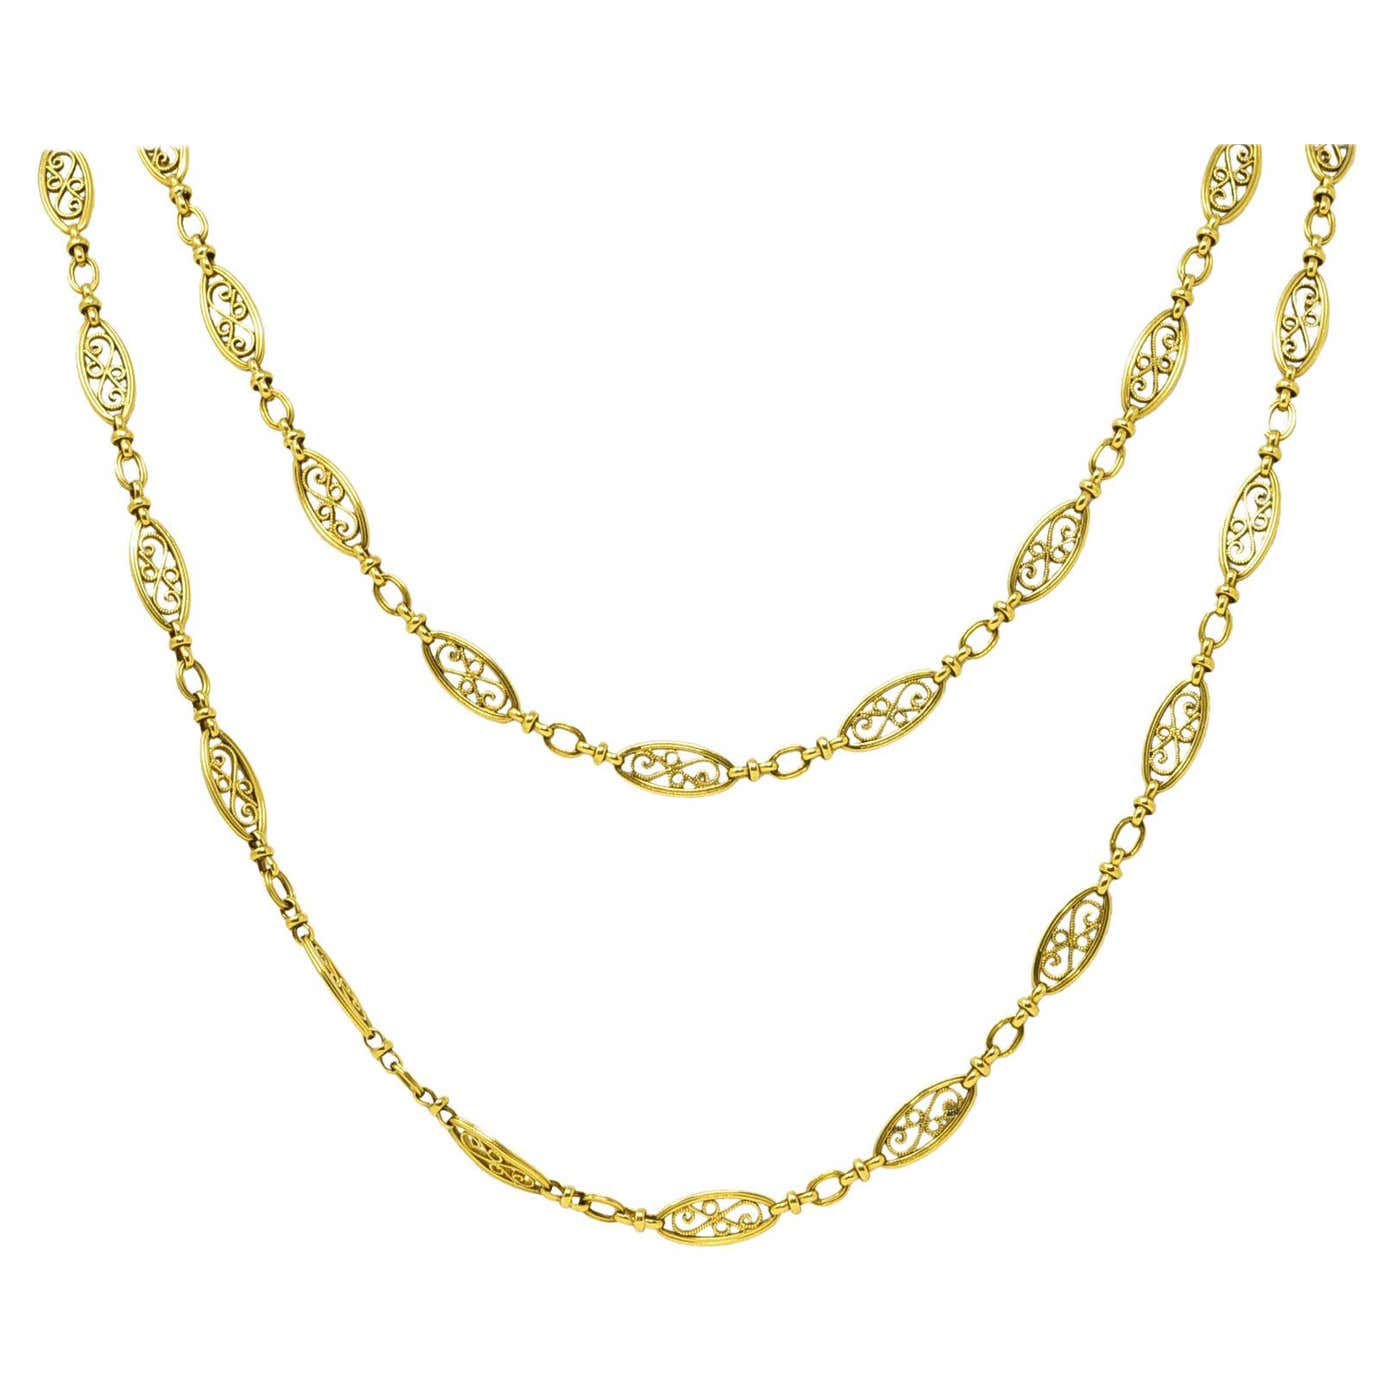 1840's French Victorian 18 Karat Yellow Gold Filigree Antique Chain at ...